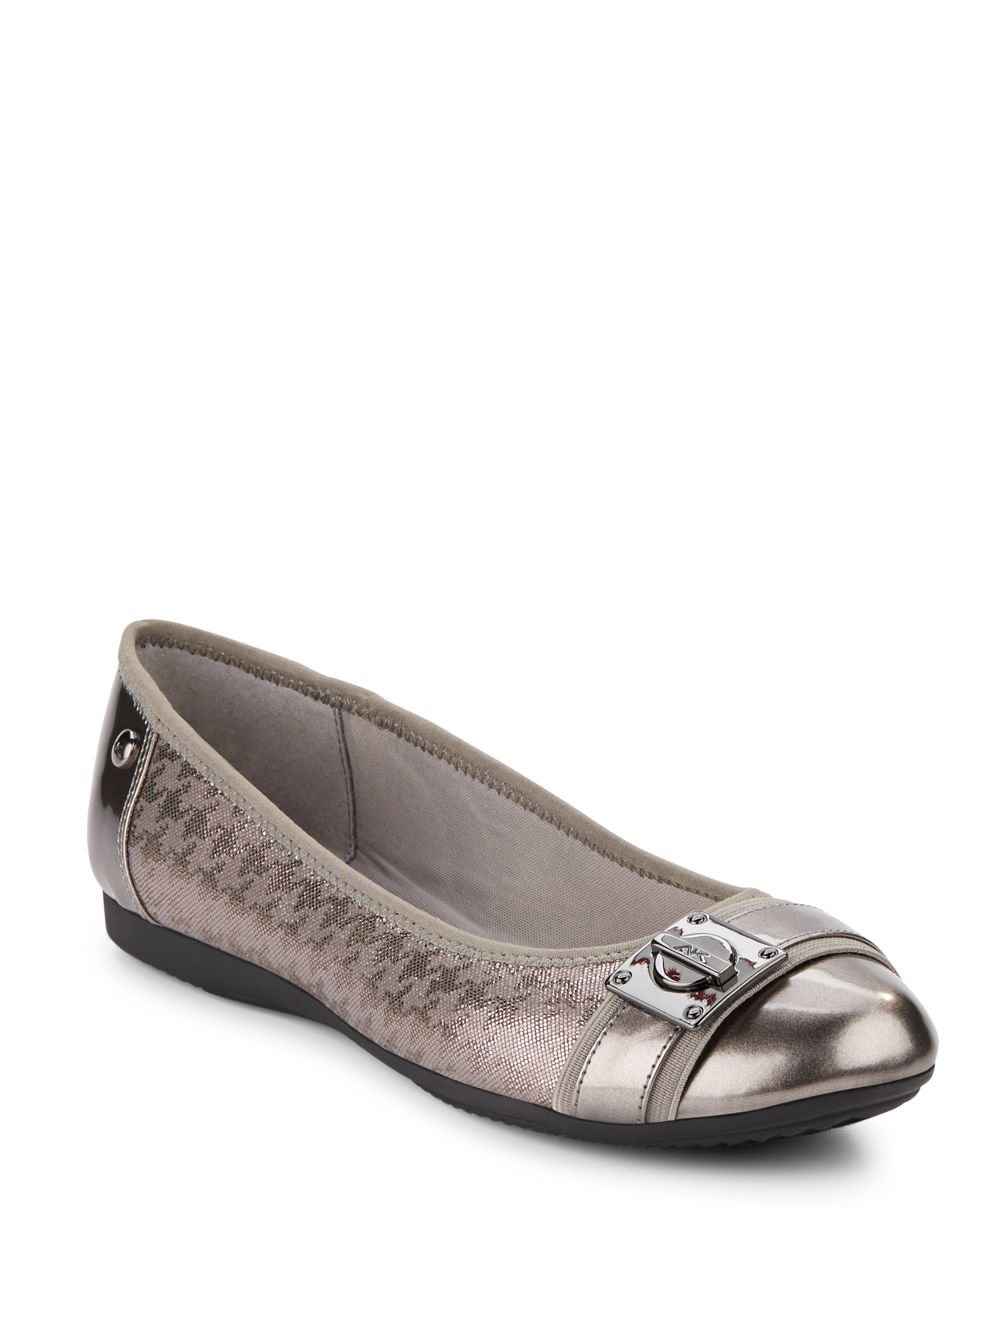 Anne klein If Only Houndstooth Flats in Metallic | Lyst